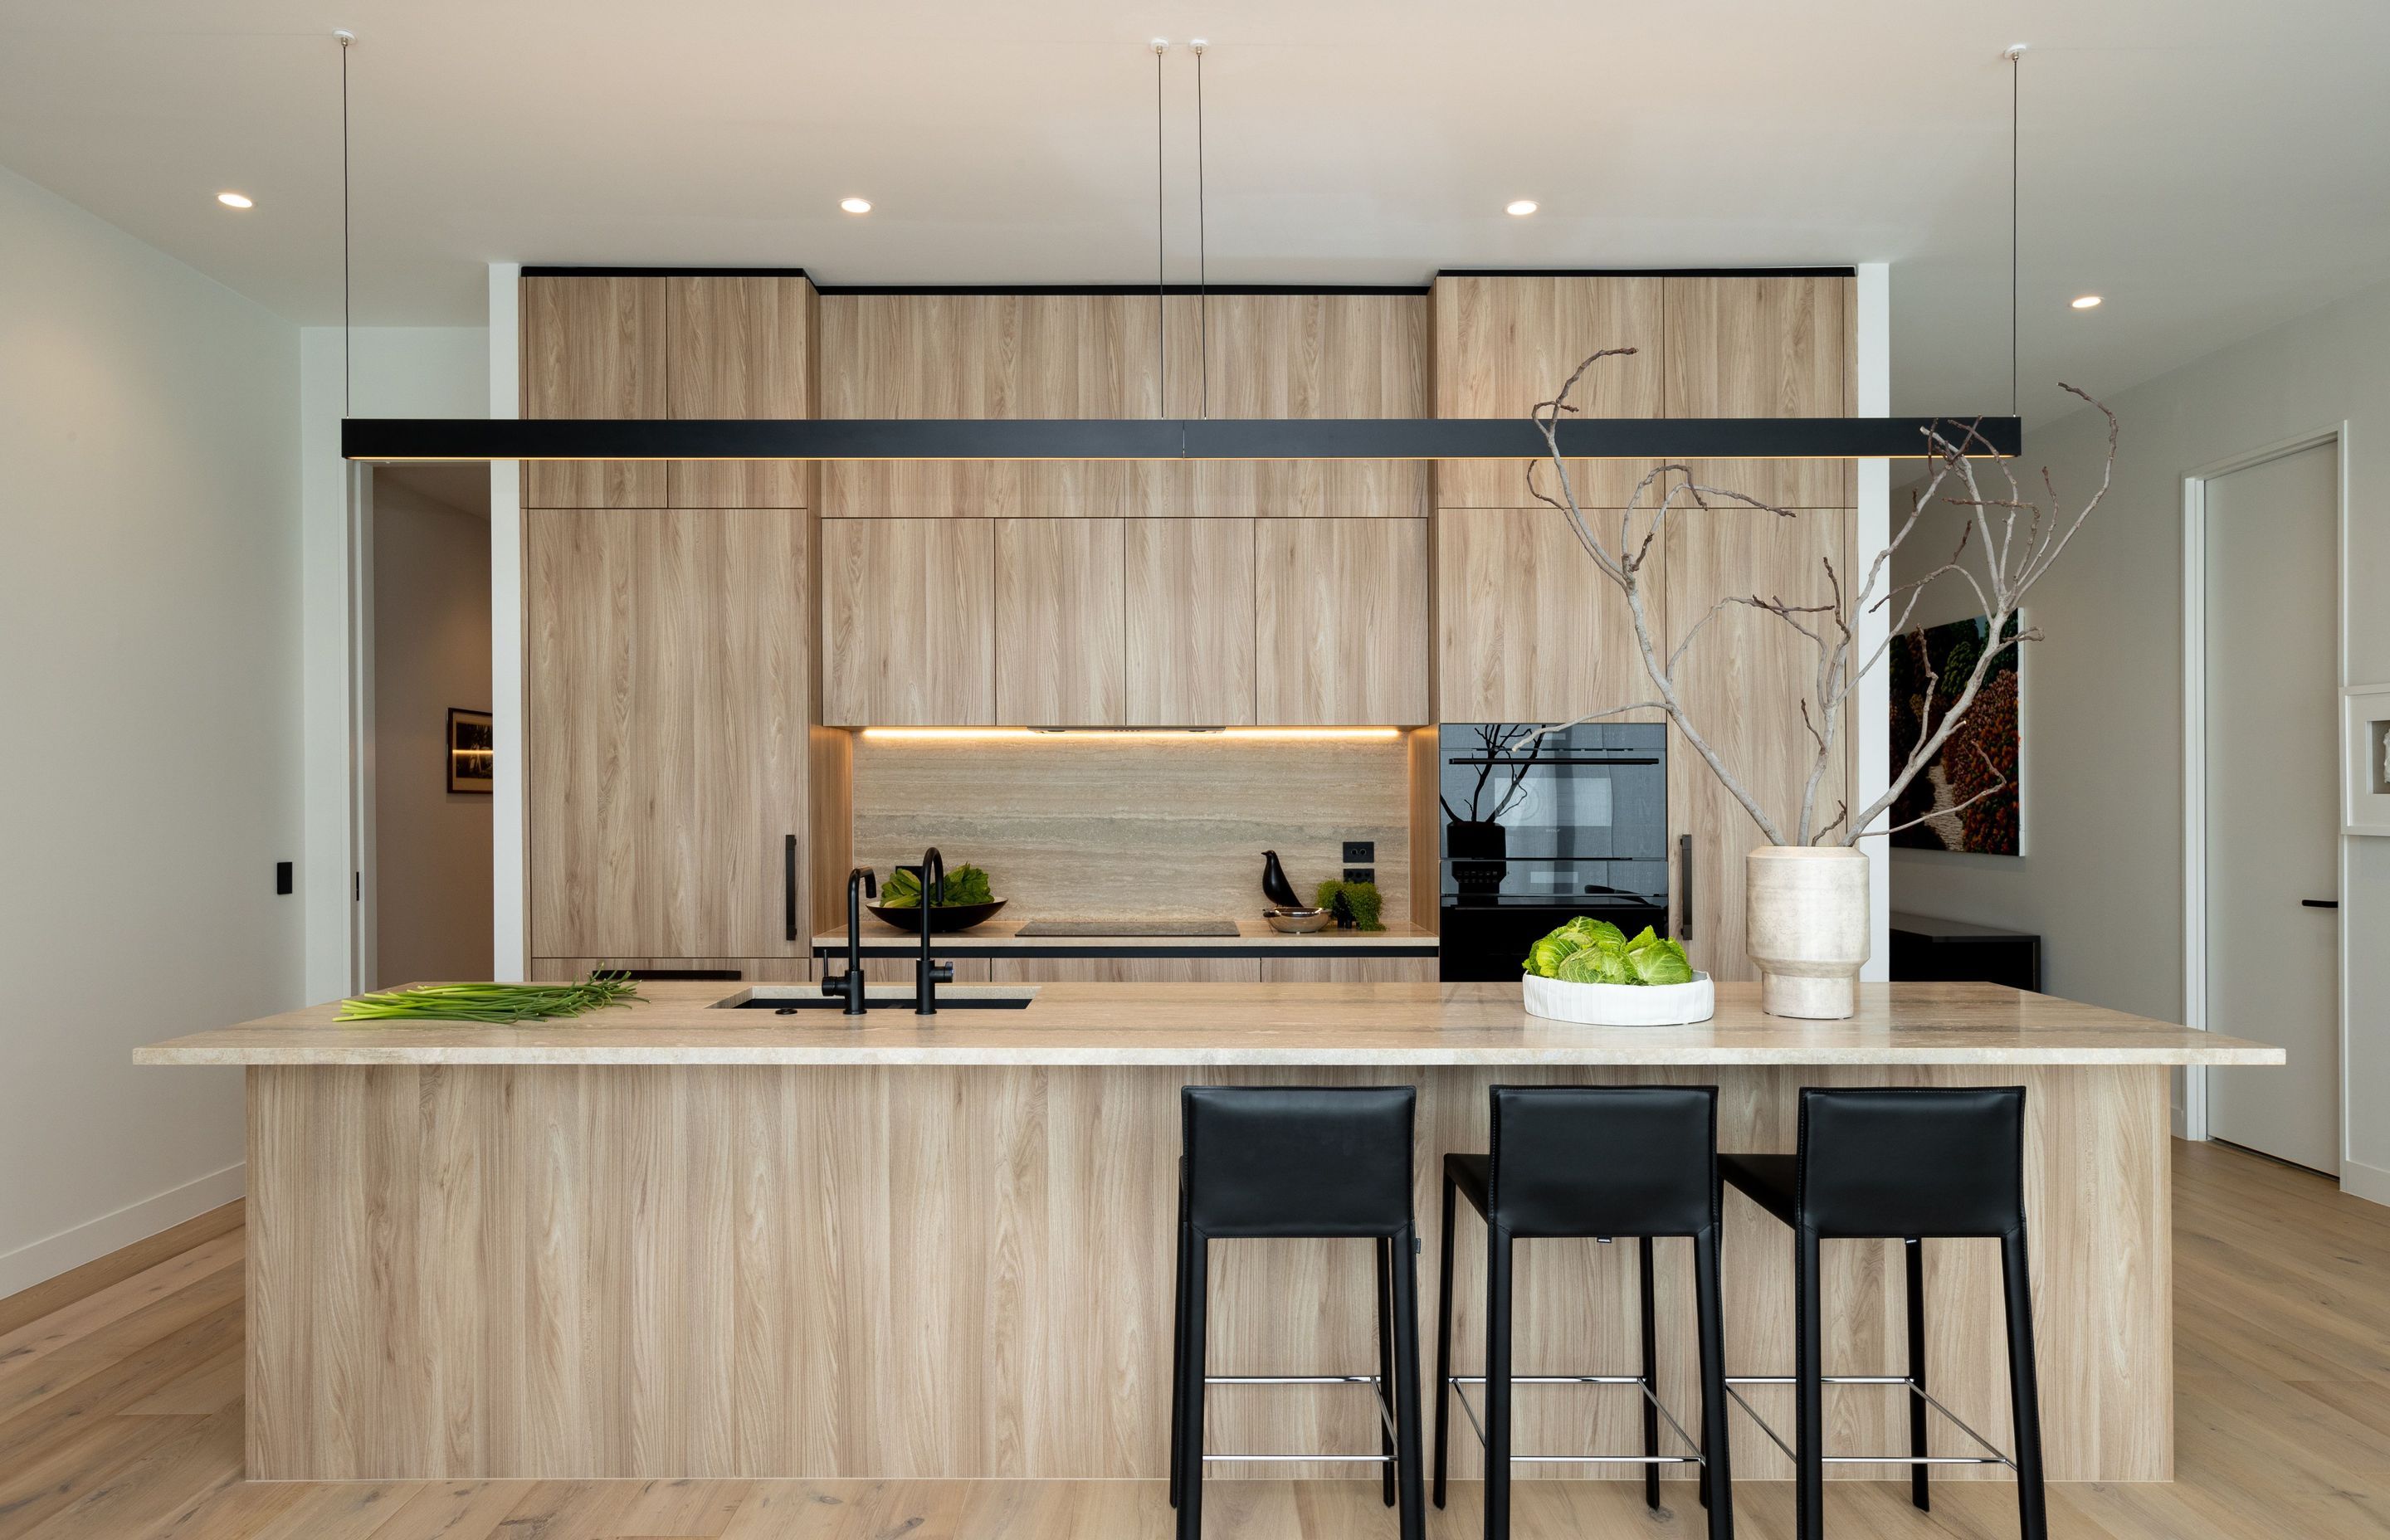 Custom kitchens were created for the penthouse levels using products from Arclinea's Convivium range.